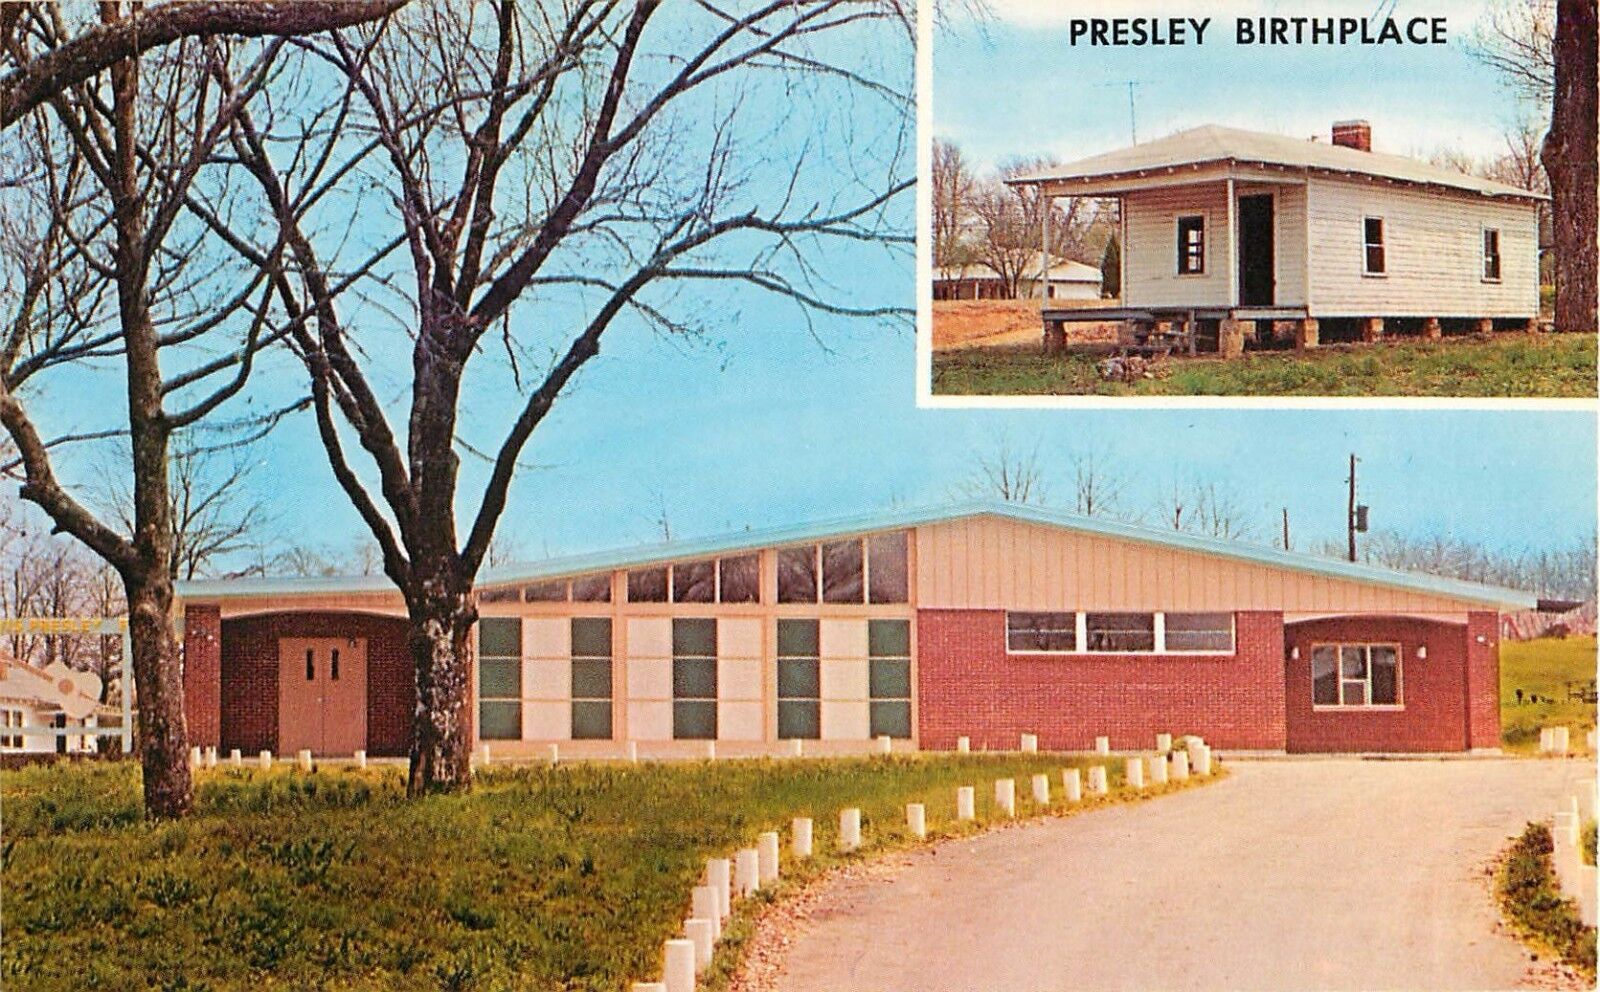 c1960s Elvis Presley Youth Center and Birth Place Tupelo, Mississippi Postcard  